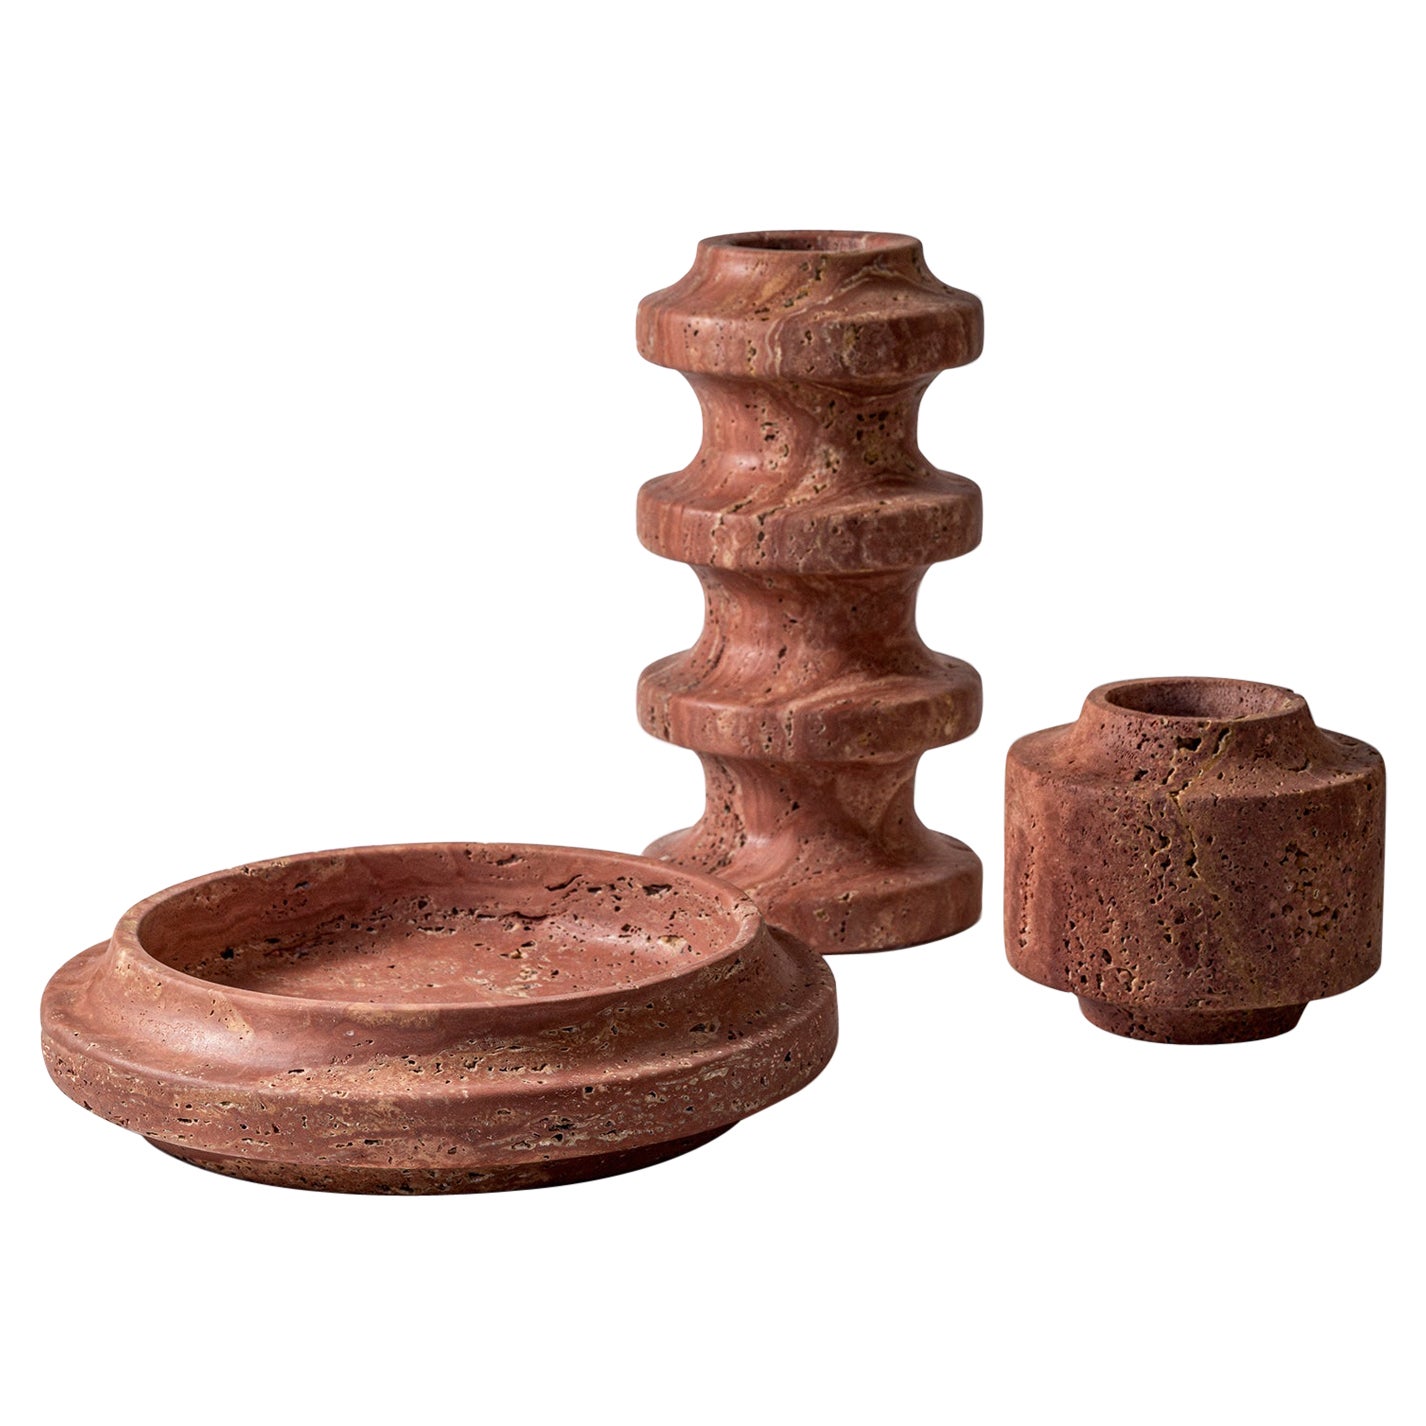 Set of 3 Red Travertine High Vase, Bowl and Pot by Etamorph For Sale